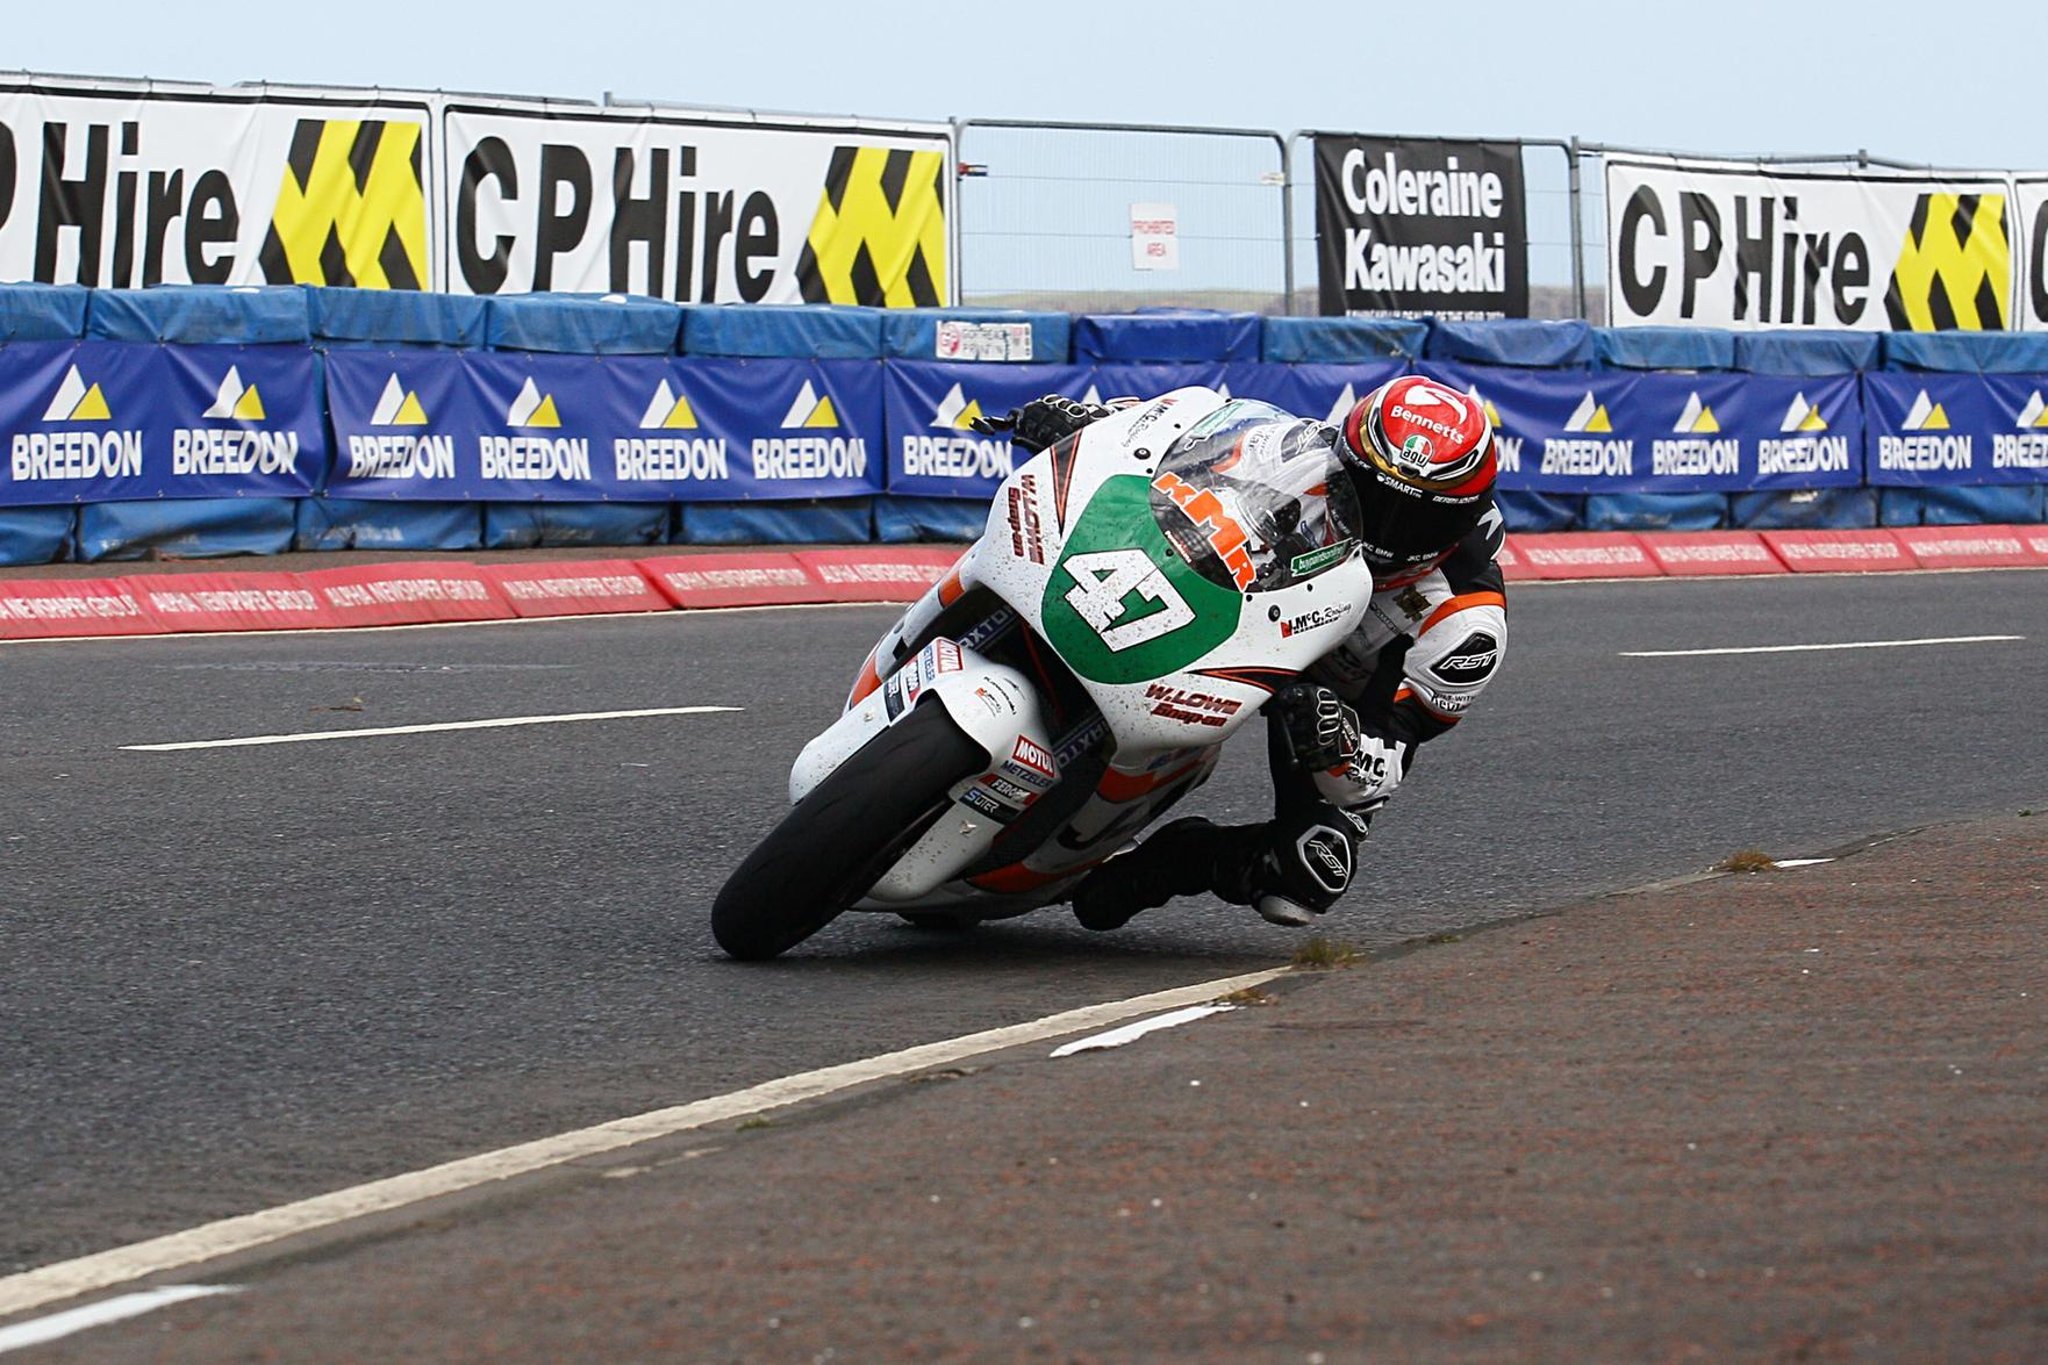 NW200: Double Supertwin winner Richard Cooper excluded from results over technical infringement